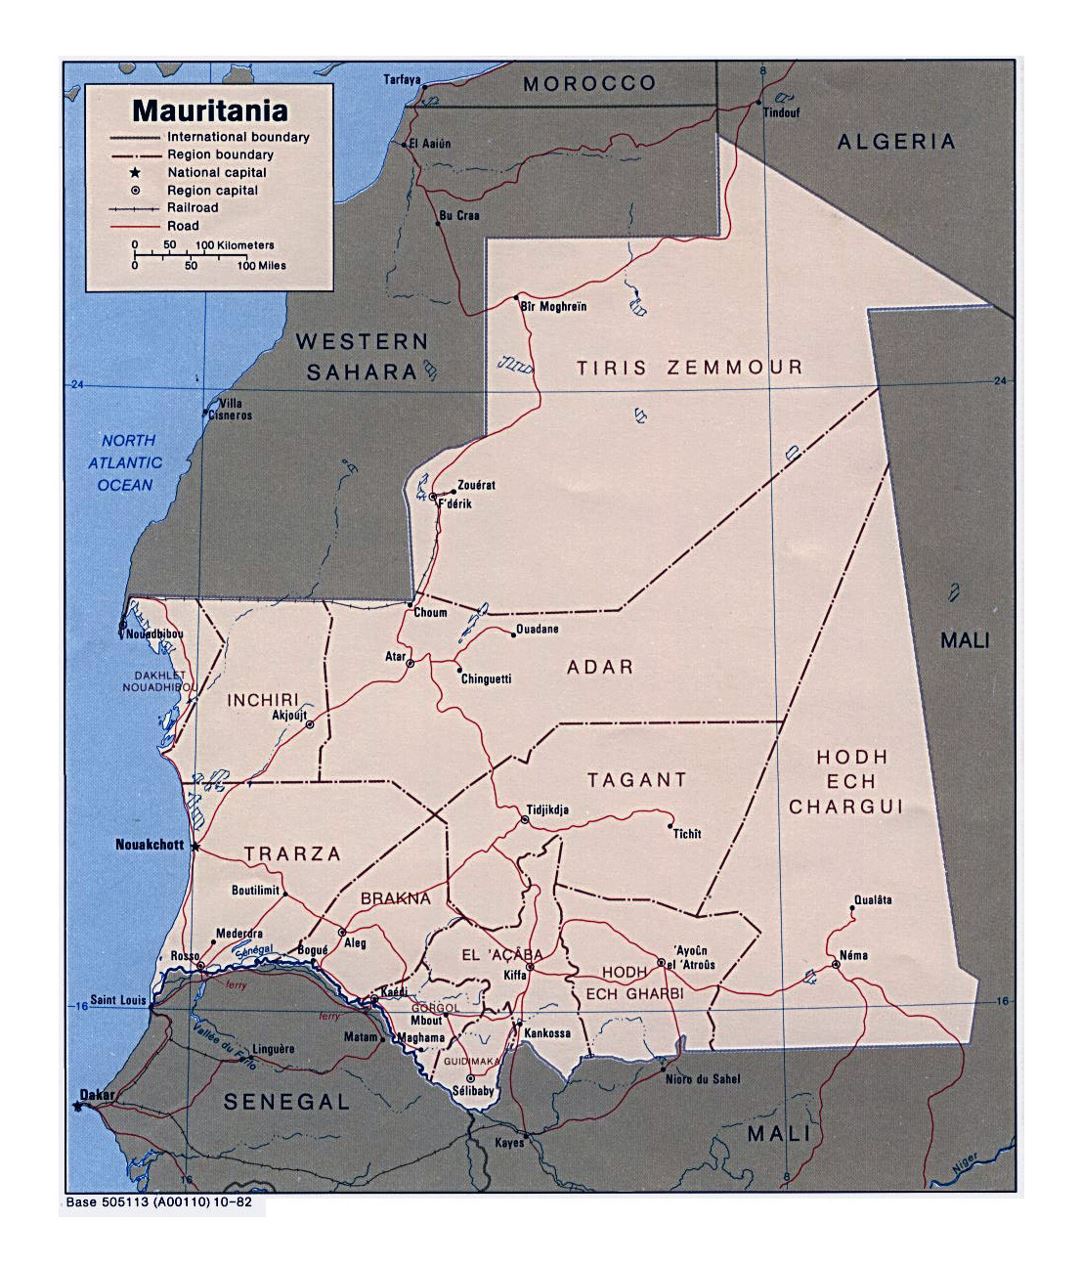 Detailed political and administrative map of Mauritania with roads, railroads and major cities - 1982